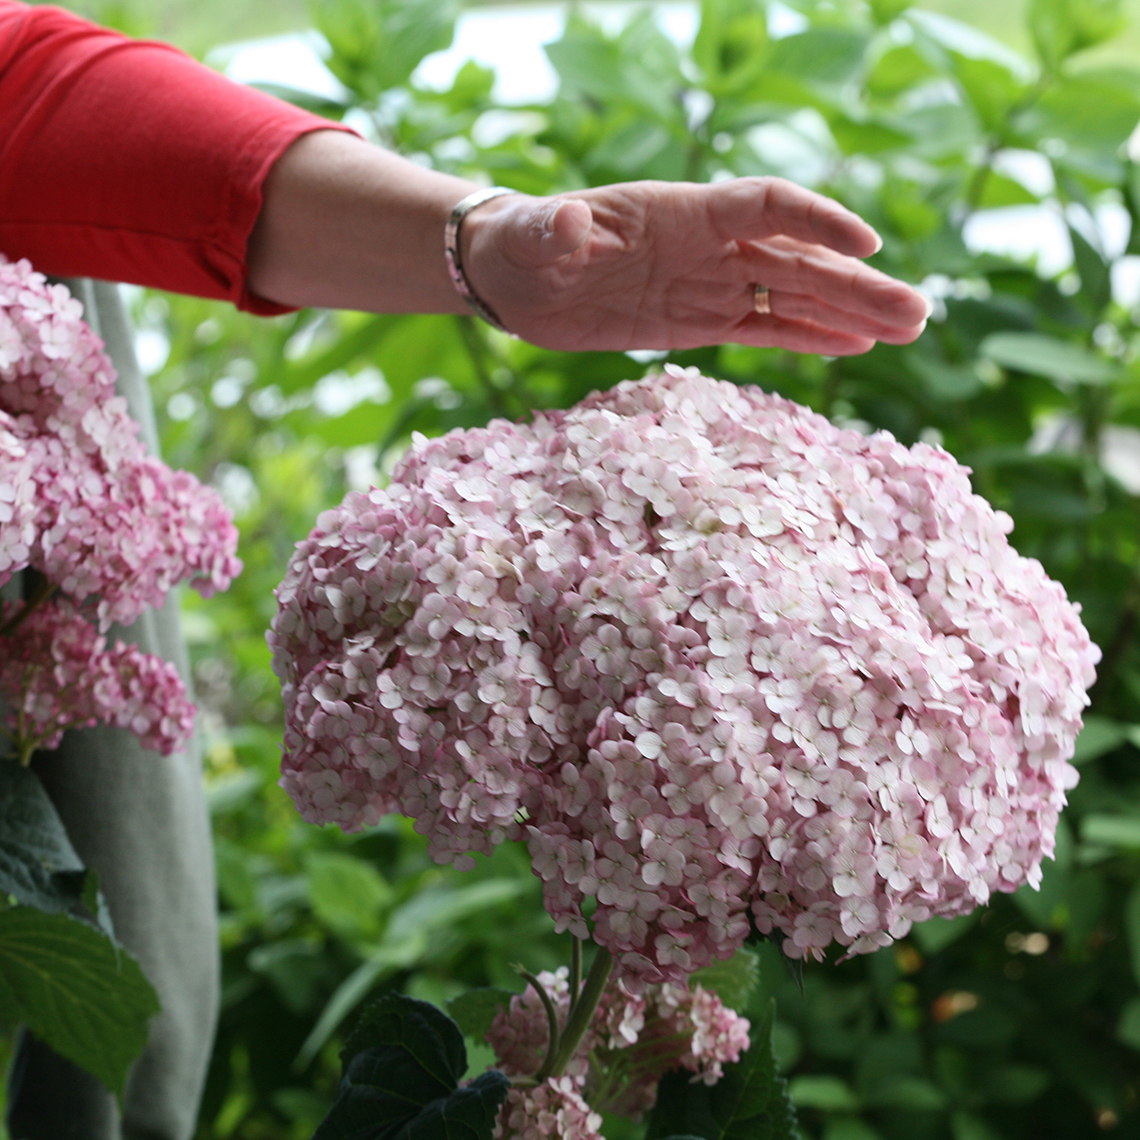 The very large pink mophead blooms of Incrediball Blush hydrangea with a hand for scale